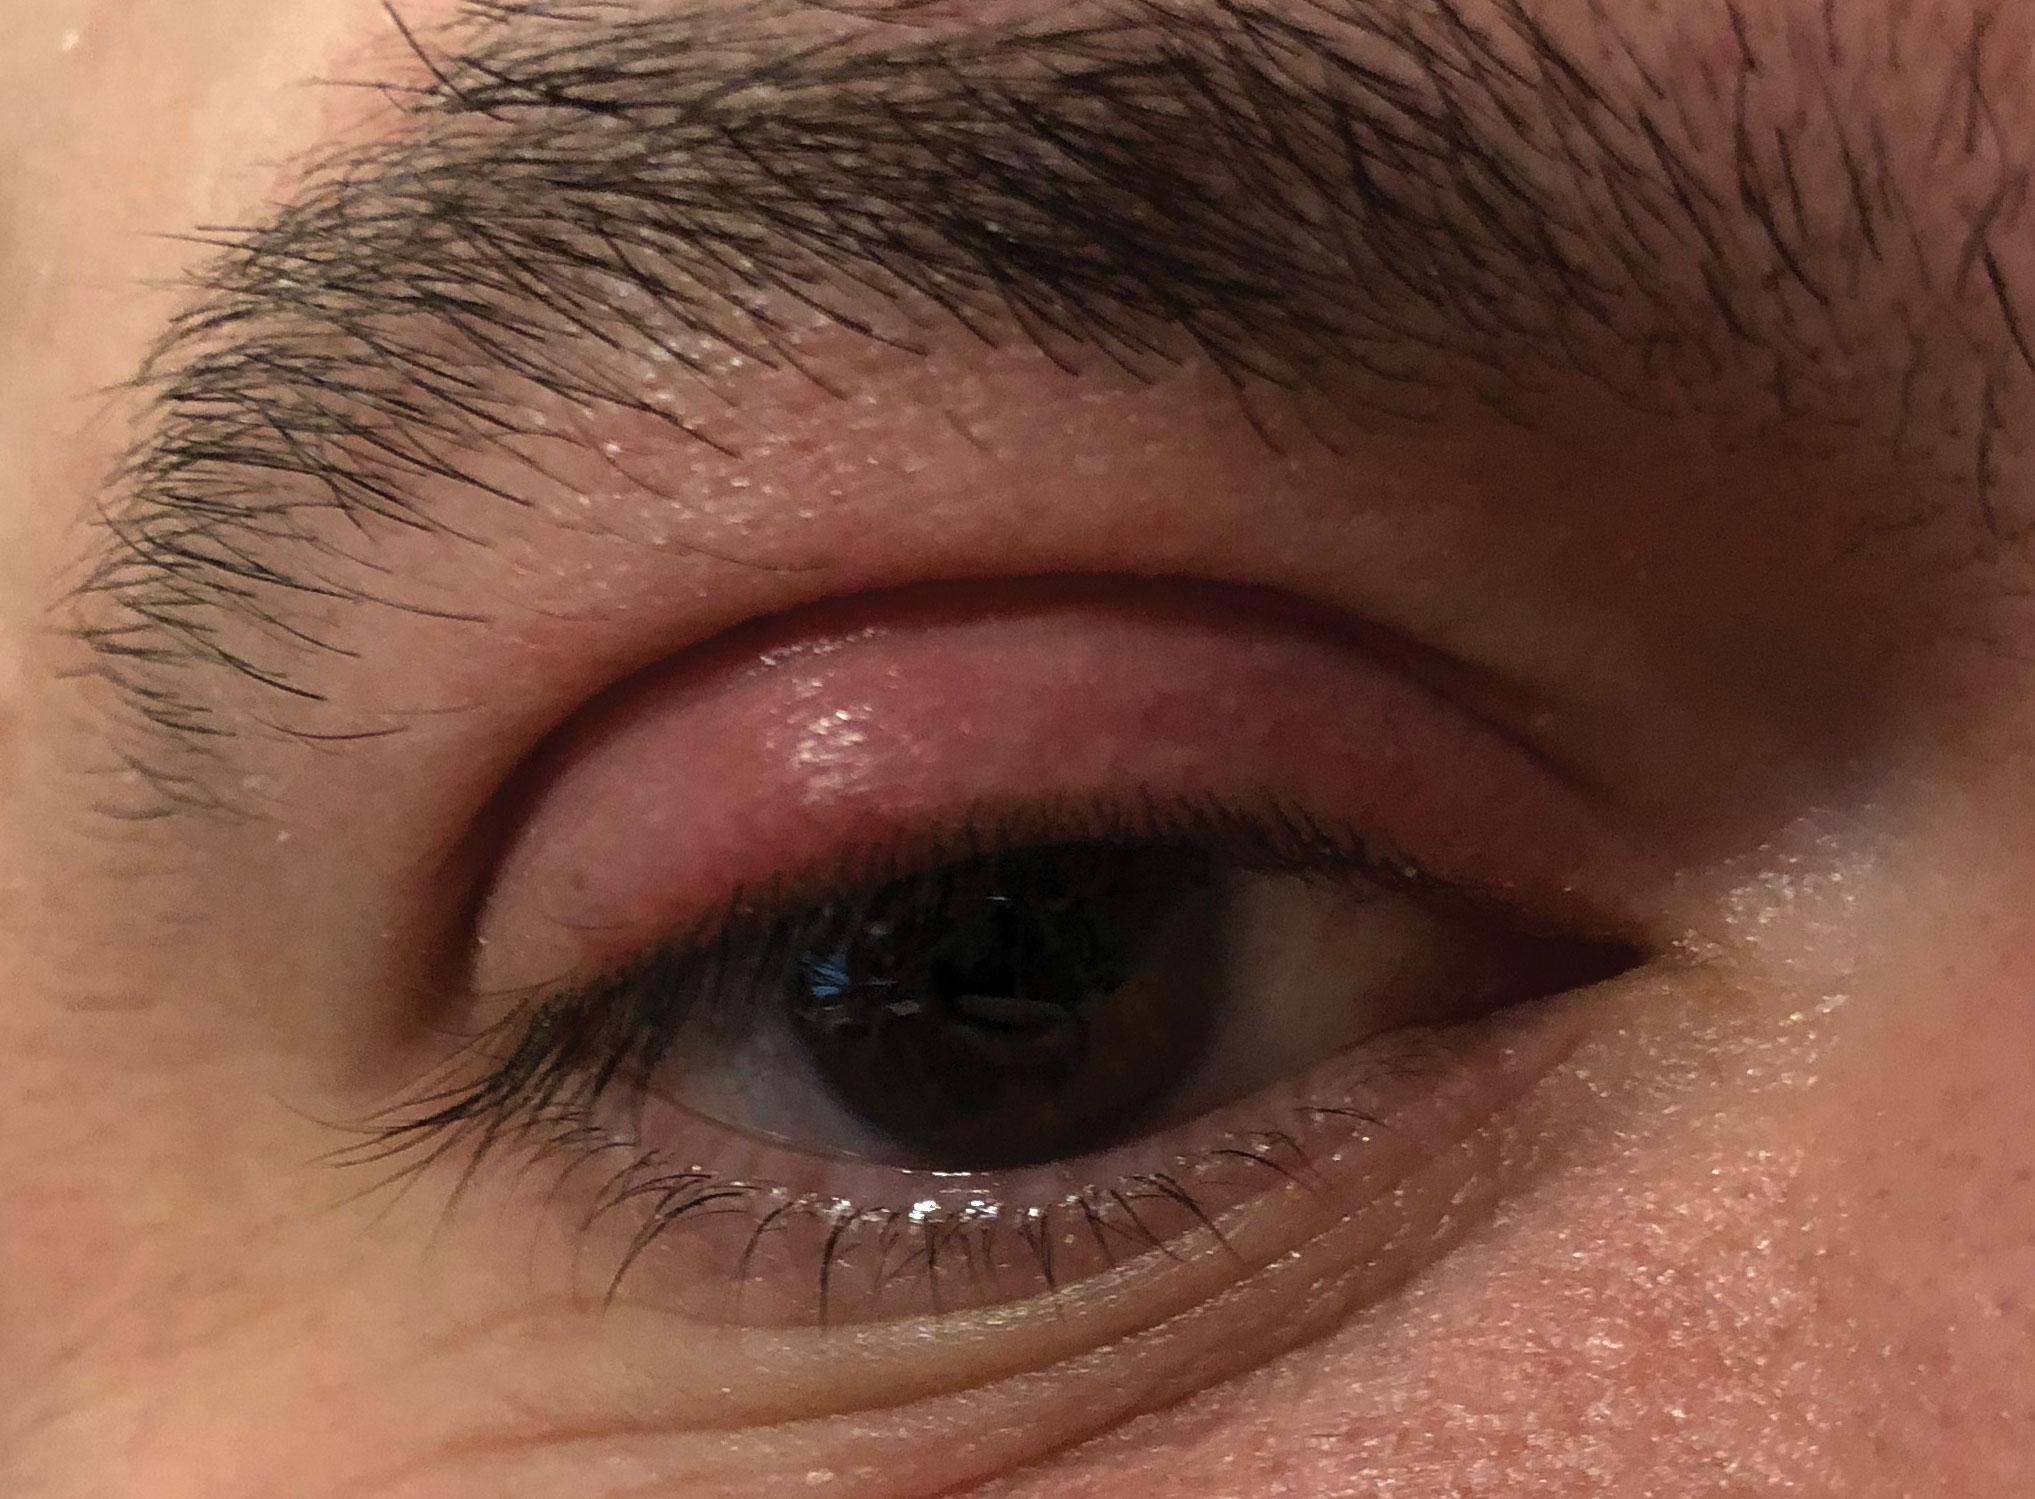 This internally pointed hordeolum of the upper eyelid may respond well to topical ointments and hot compresses.